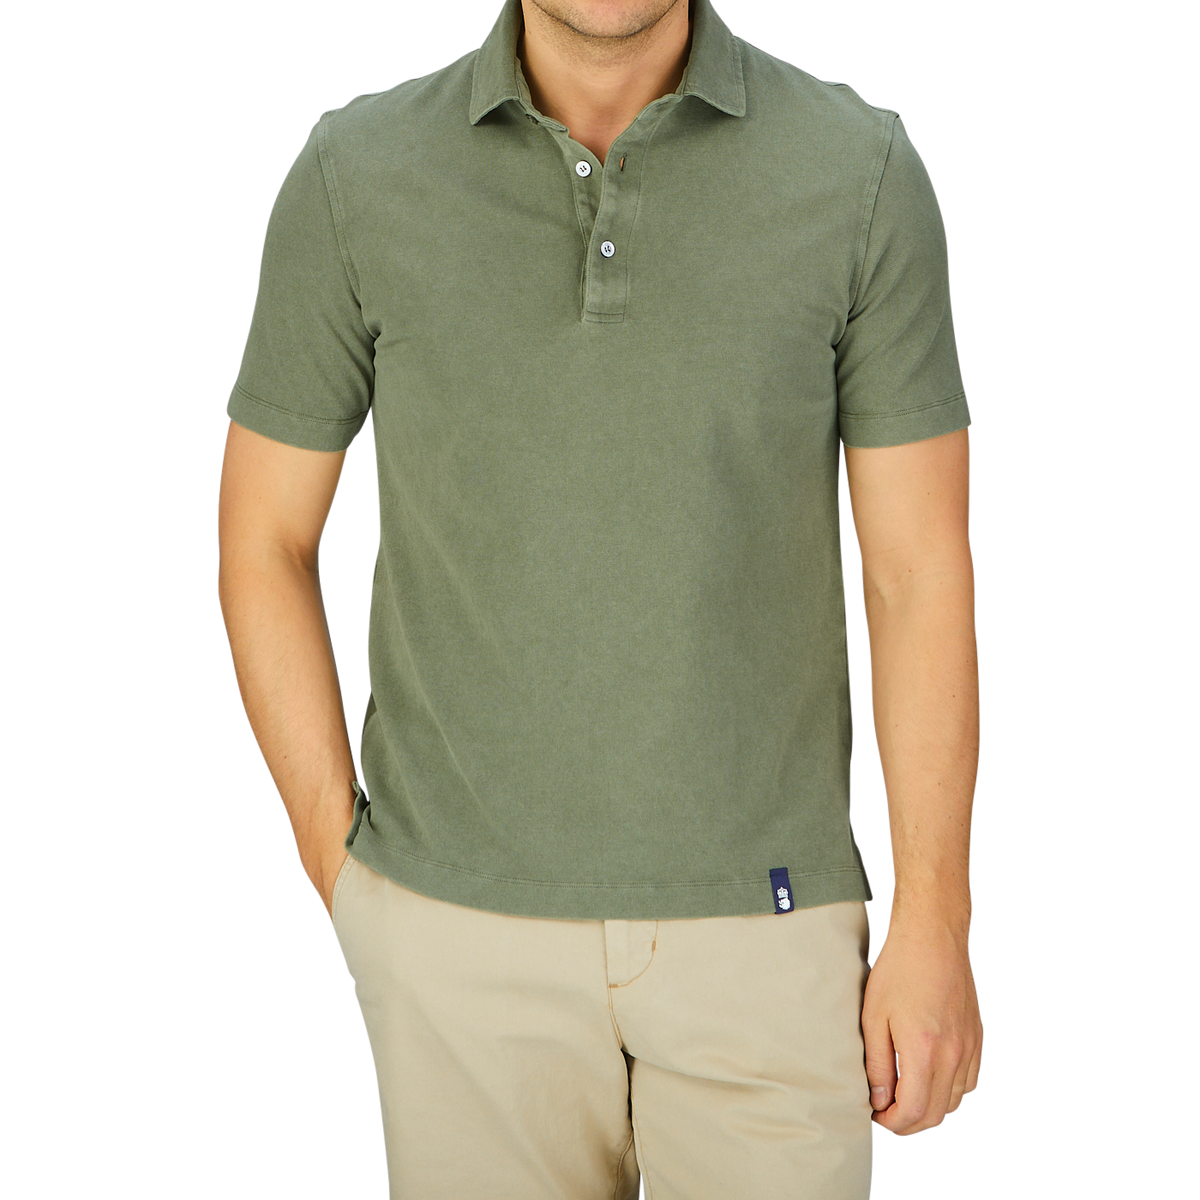 Man wearing a grass green Drumohr cotton piquet polo shirt from Italy and beige trousers.